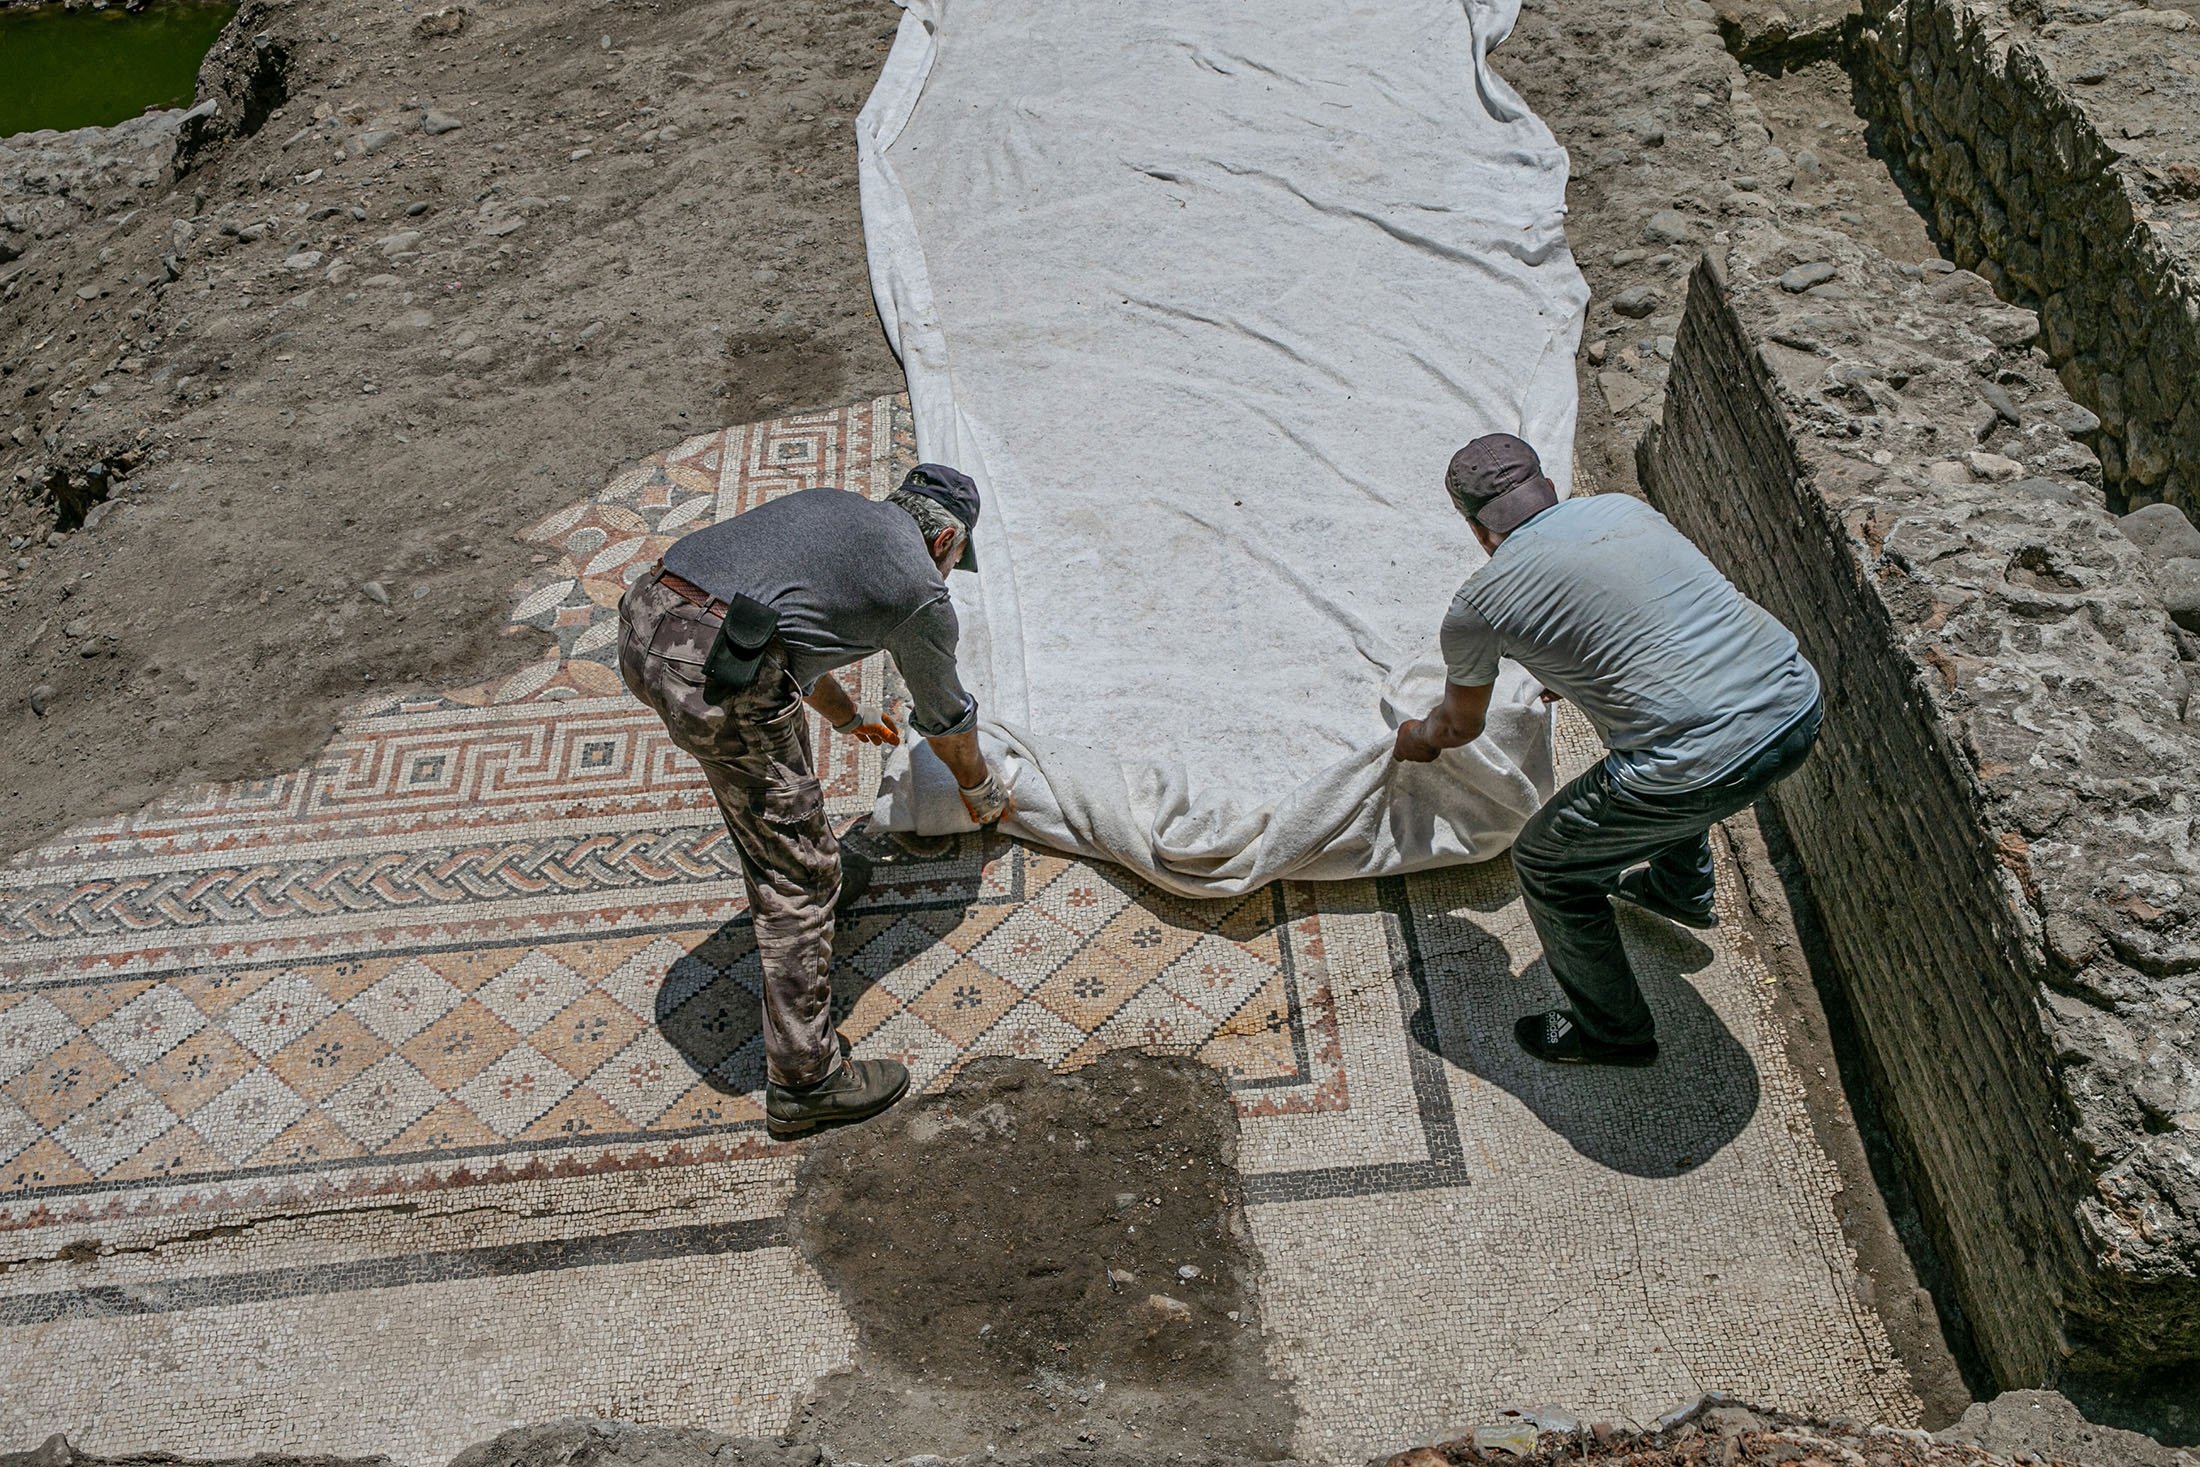 Workers work on the mosaic on the floor of a recently discovered Roman villa in the Defne district of Hatay, southern Turkey, July 4, 2022. (AA Photo)